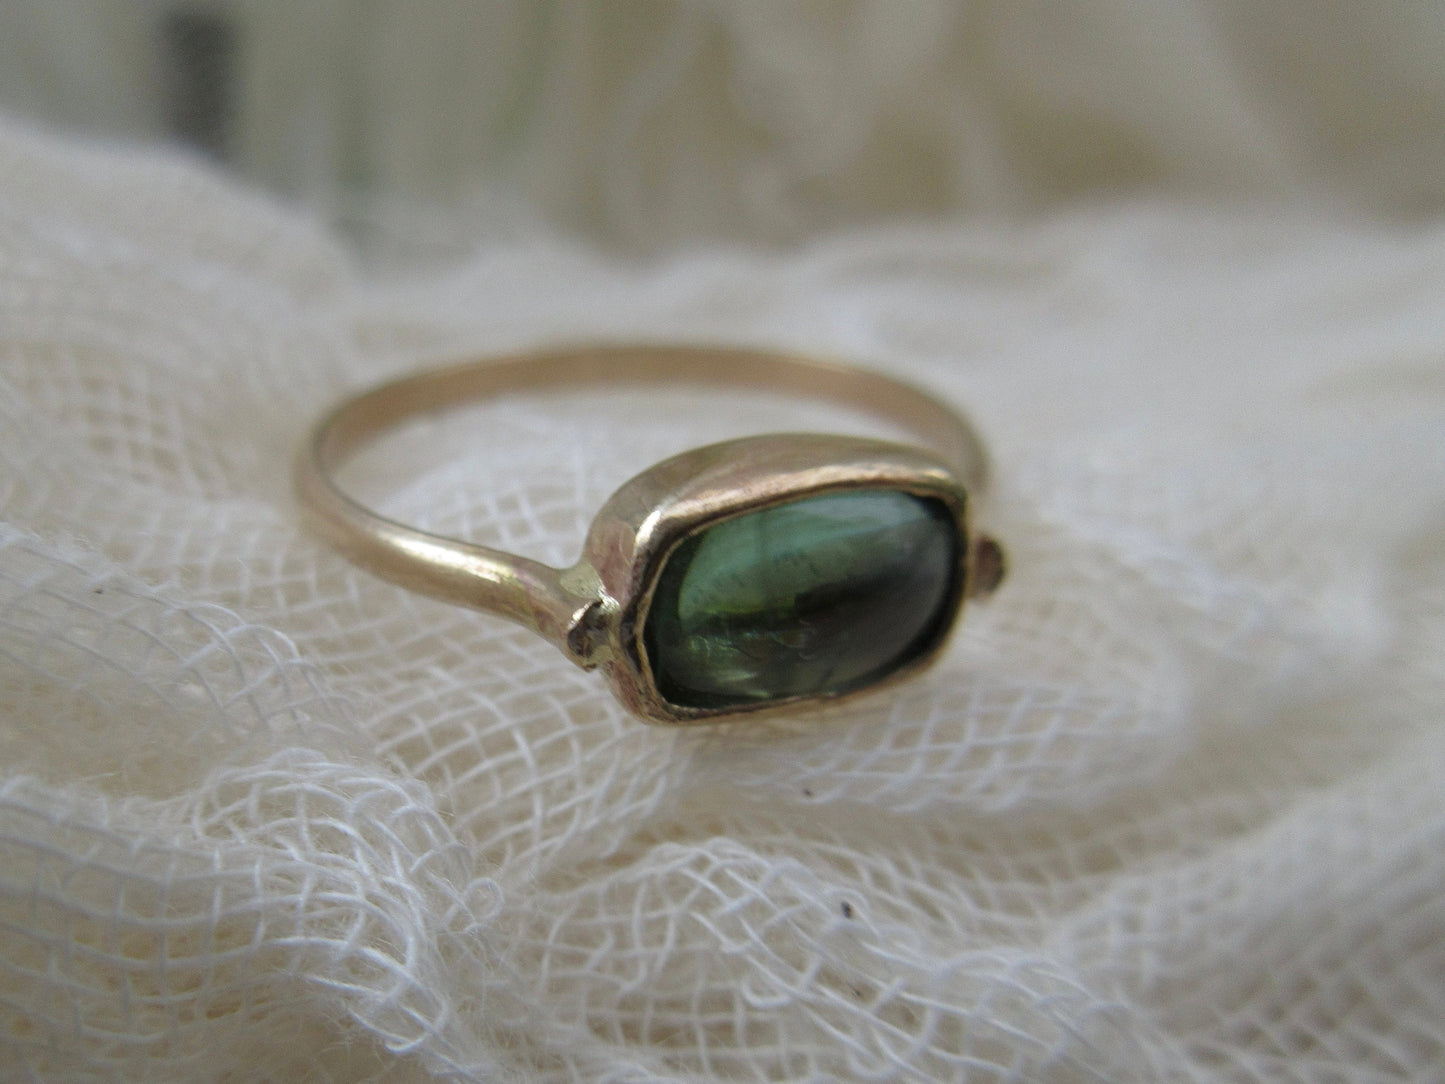 Candy ring in 14 karat gold with a light green tourmaline cabochon